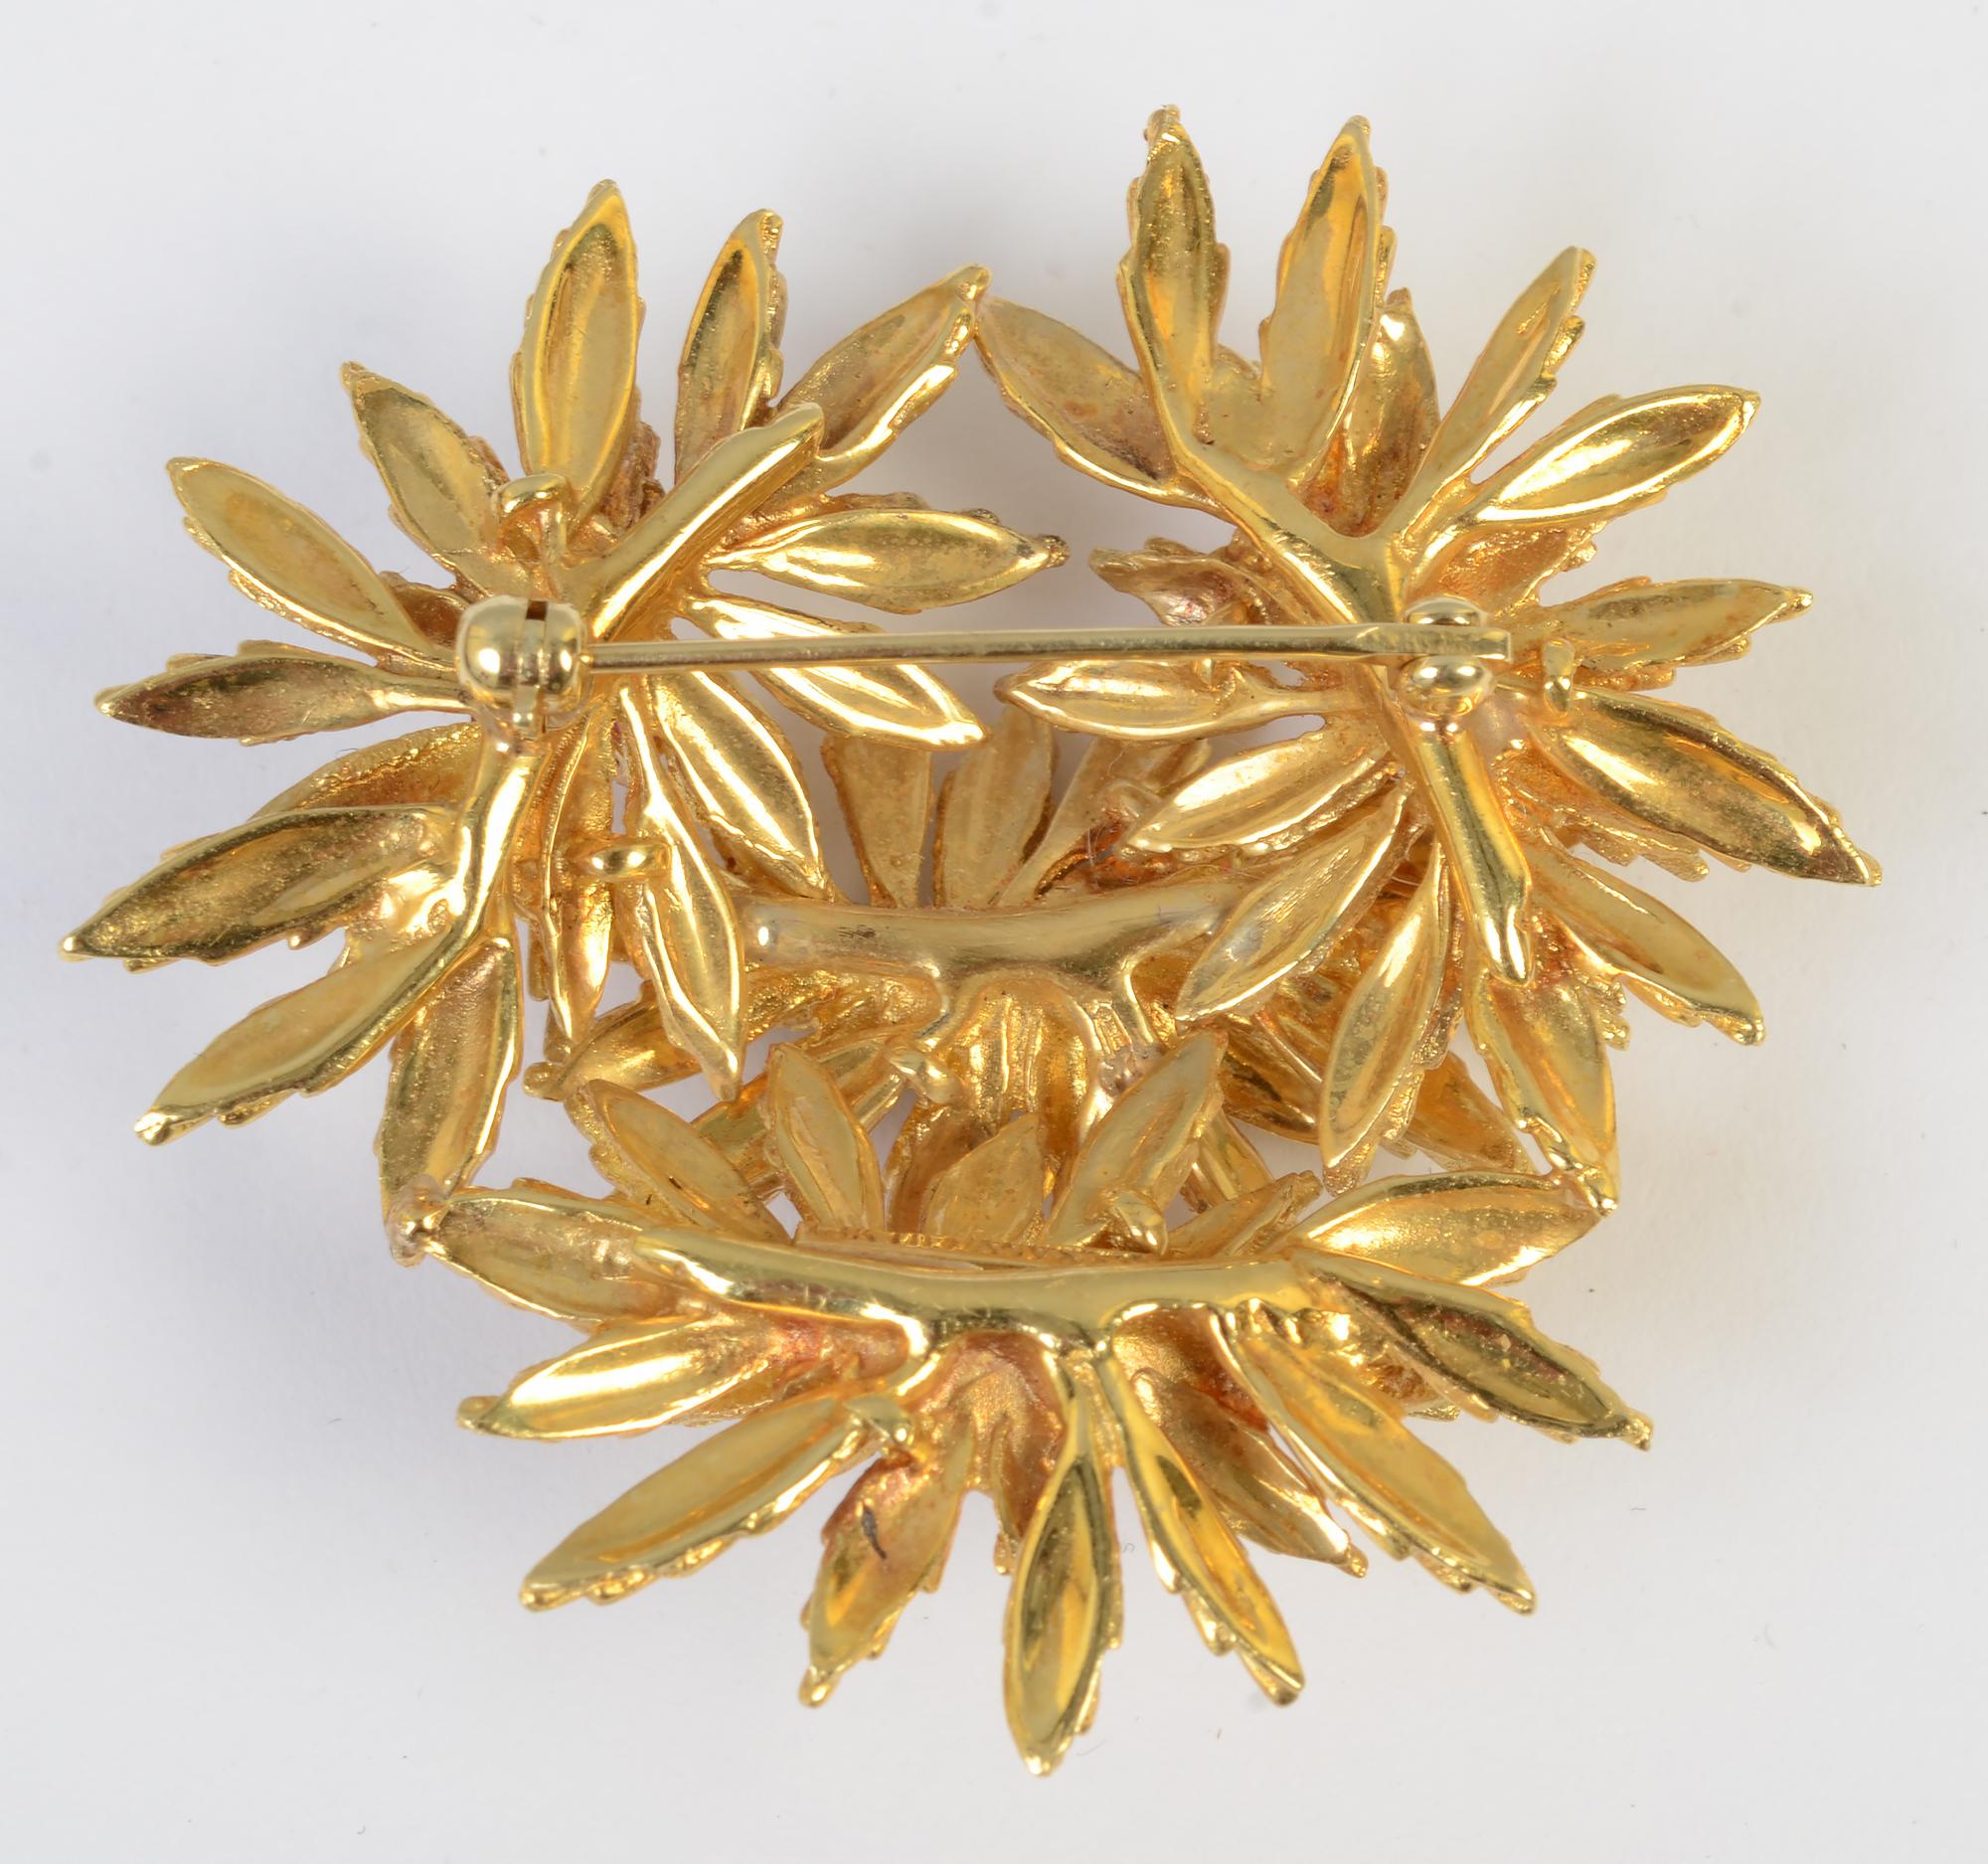 Modern Tiffany Gold Floral Brooch with Rubies and Diamonds